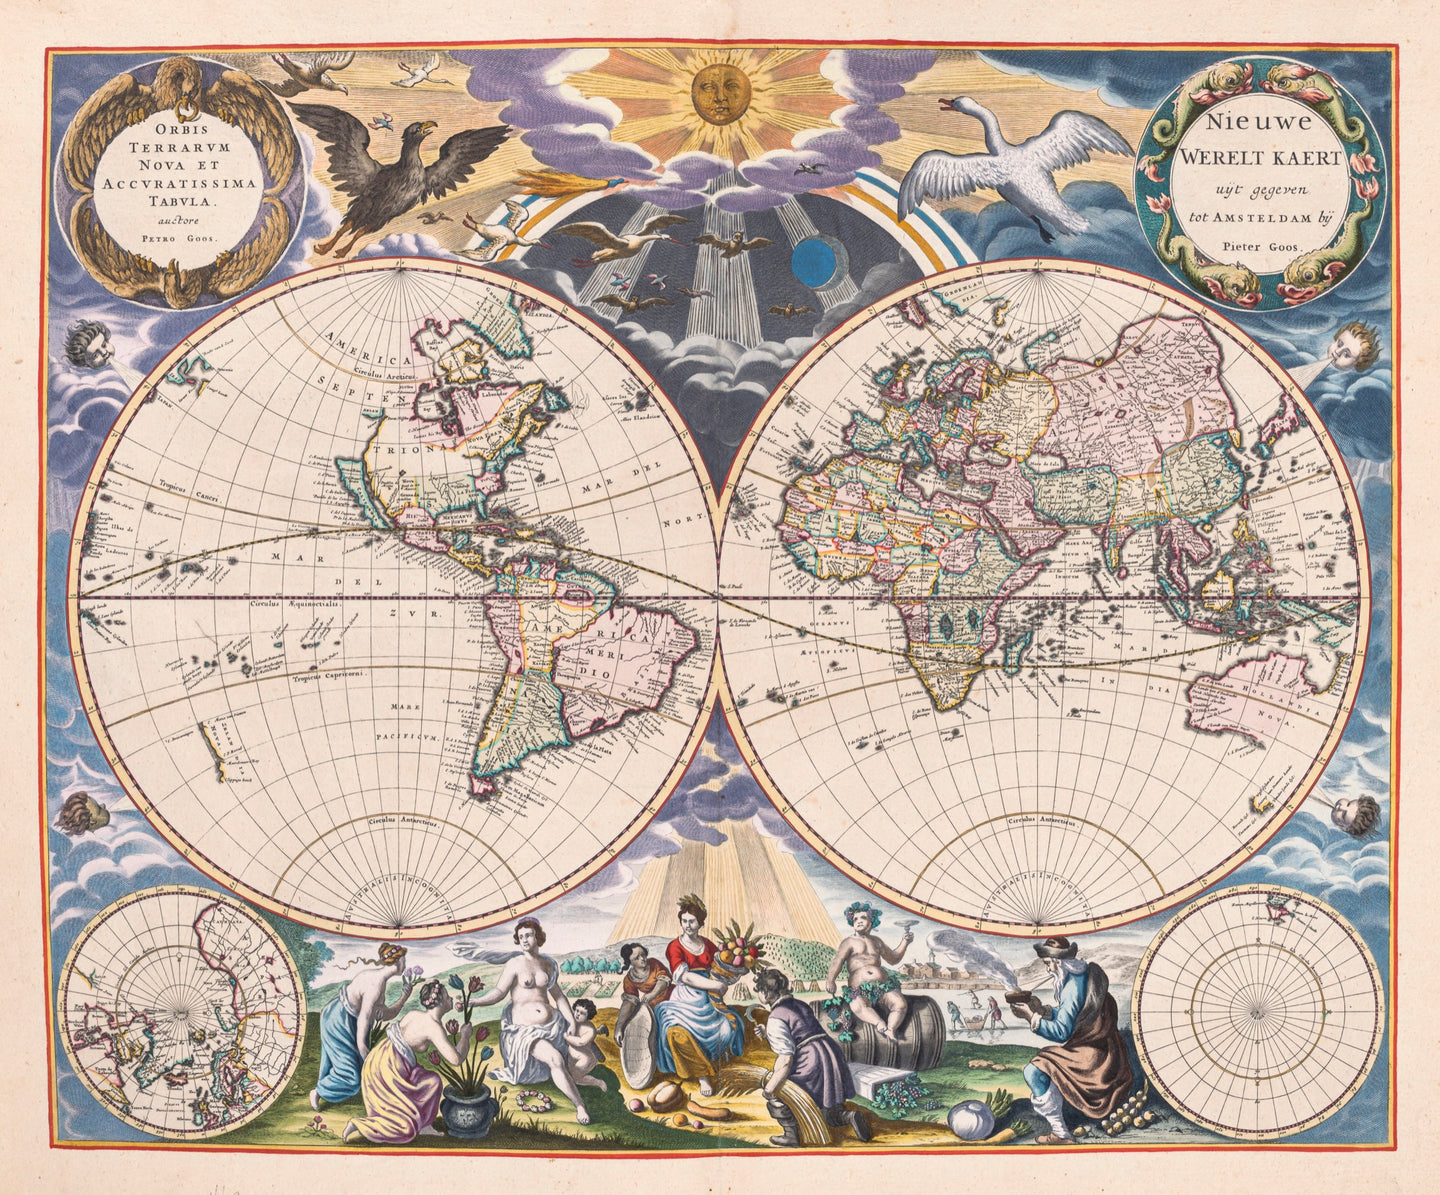 'New Map of the World' by P. Goos, 'The Sea Atlas of the Water World', 1668